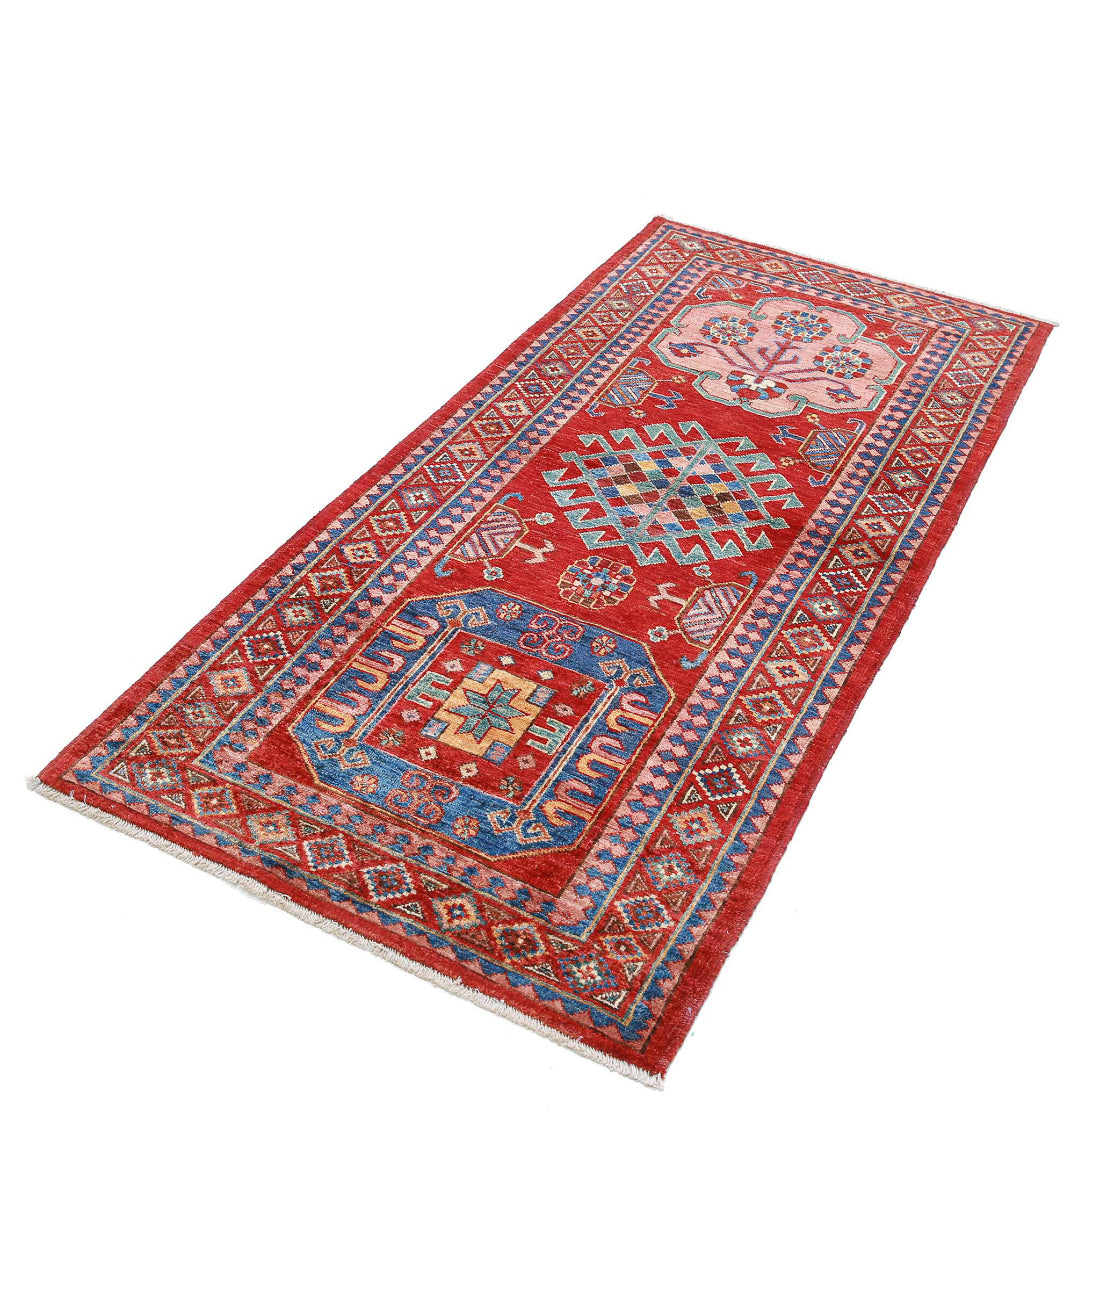 Hand Knotted Nomadic Caucasian Humna Wool Rug - 2'10'' x 5'10'' 2'10'' x 5'10'' (85 X 175) / Red / Blue